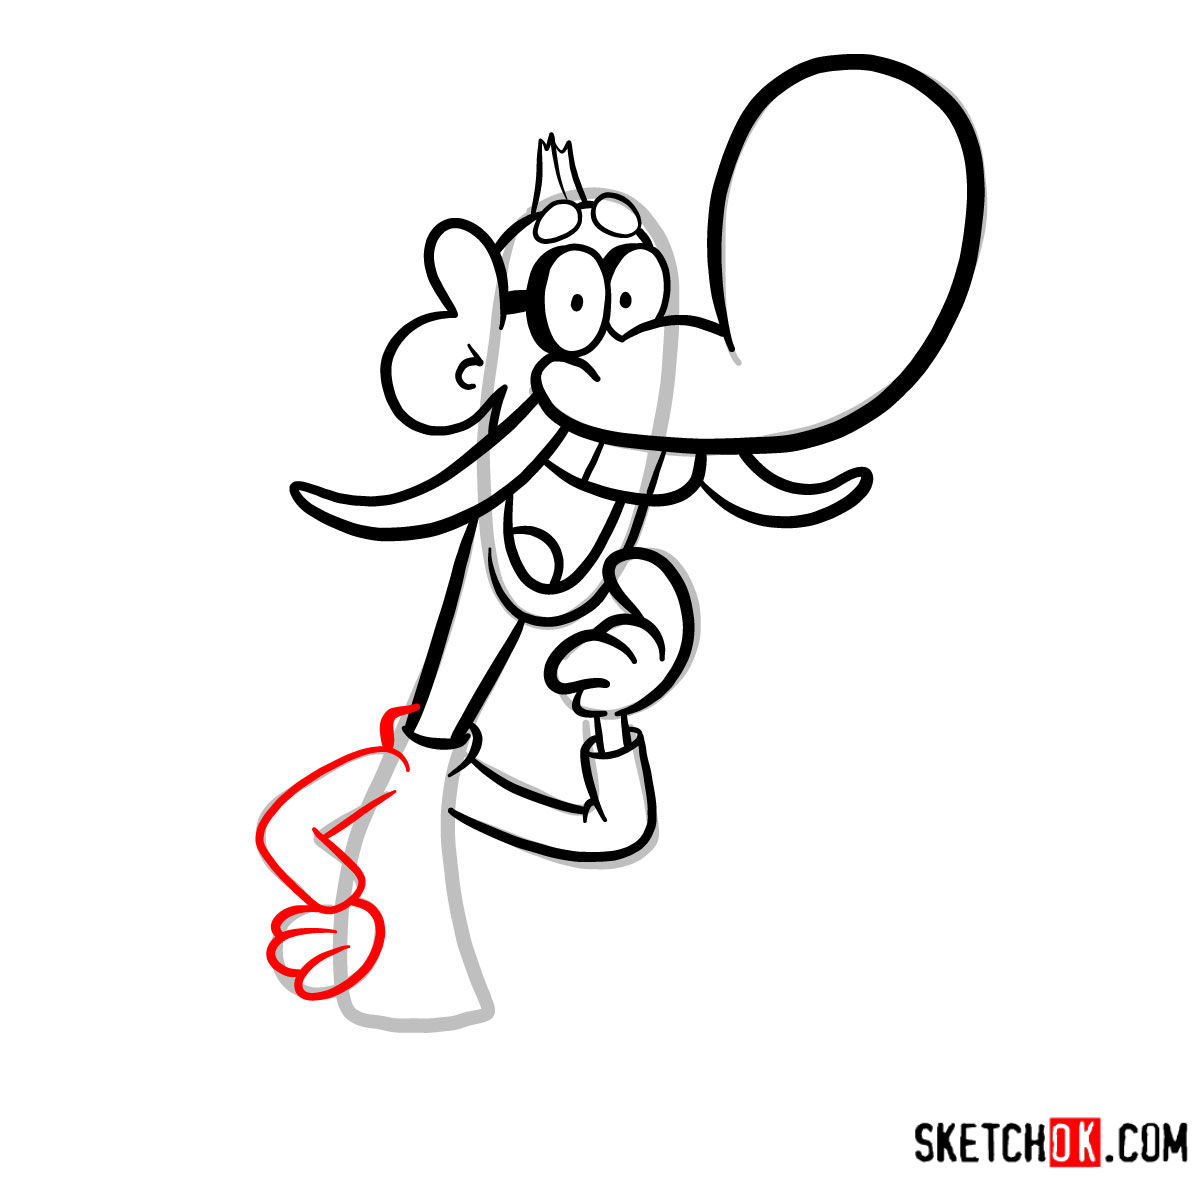 How to draw Mung Daal from Chowder series - step 08